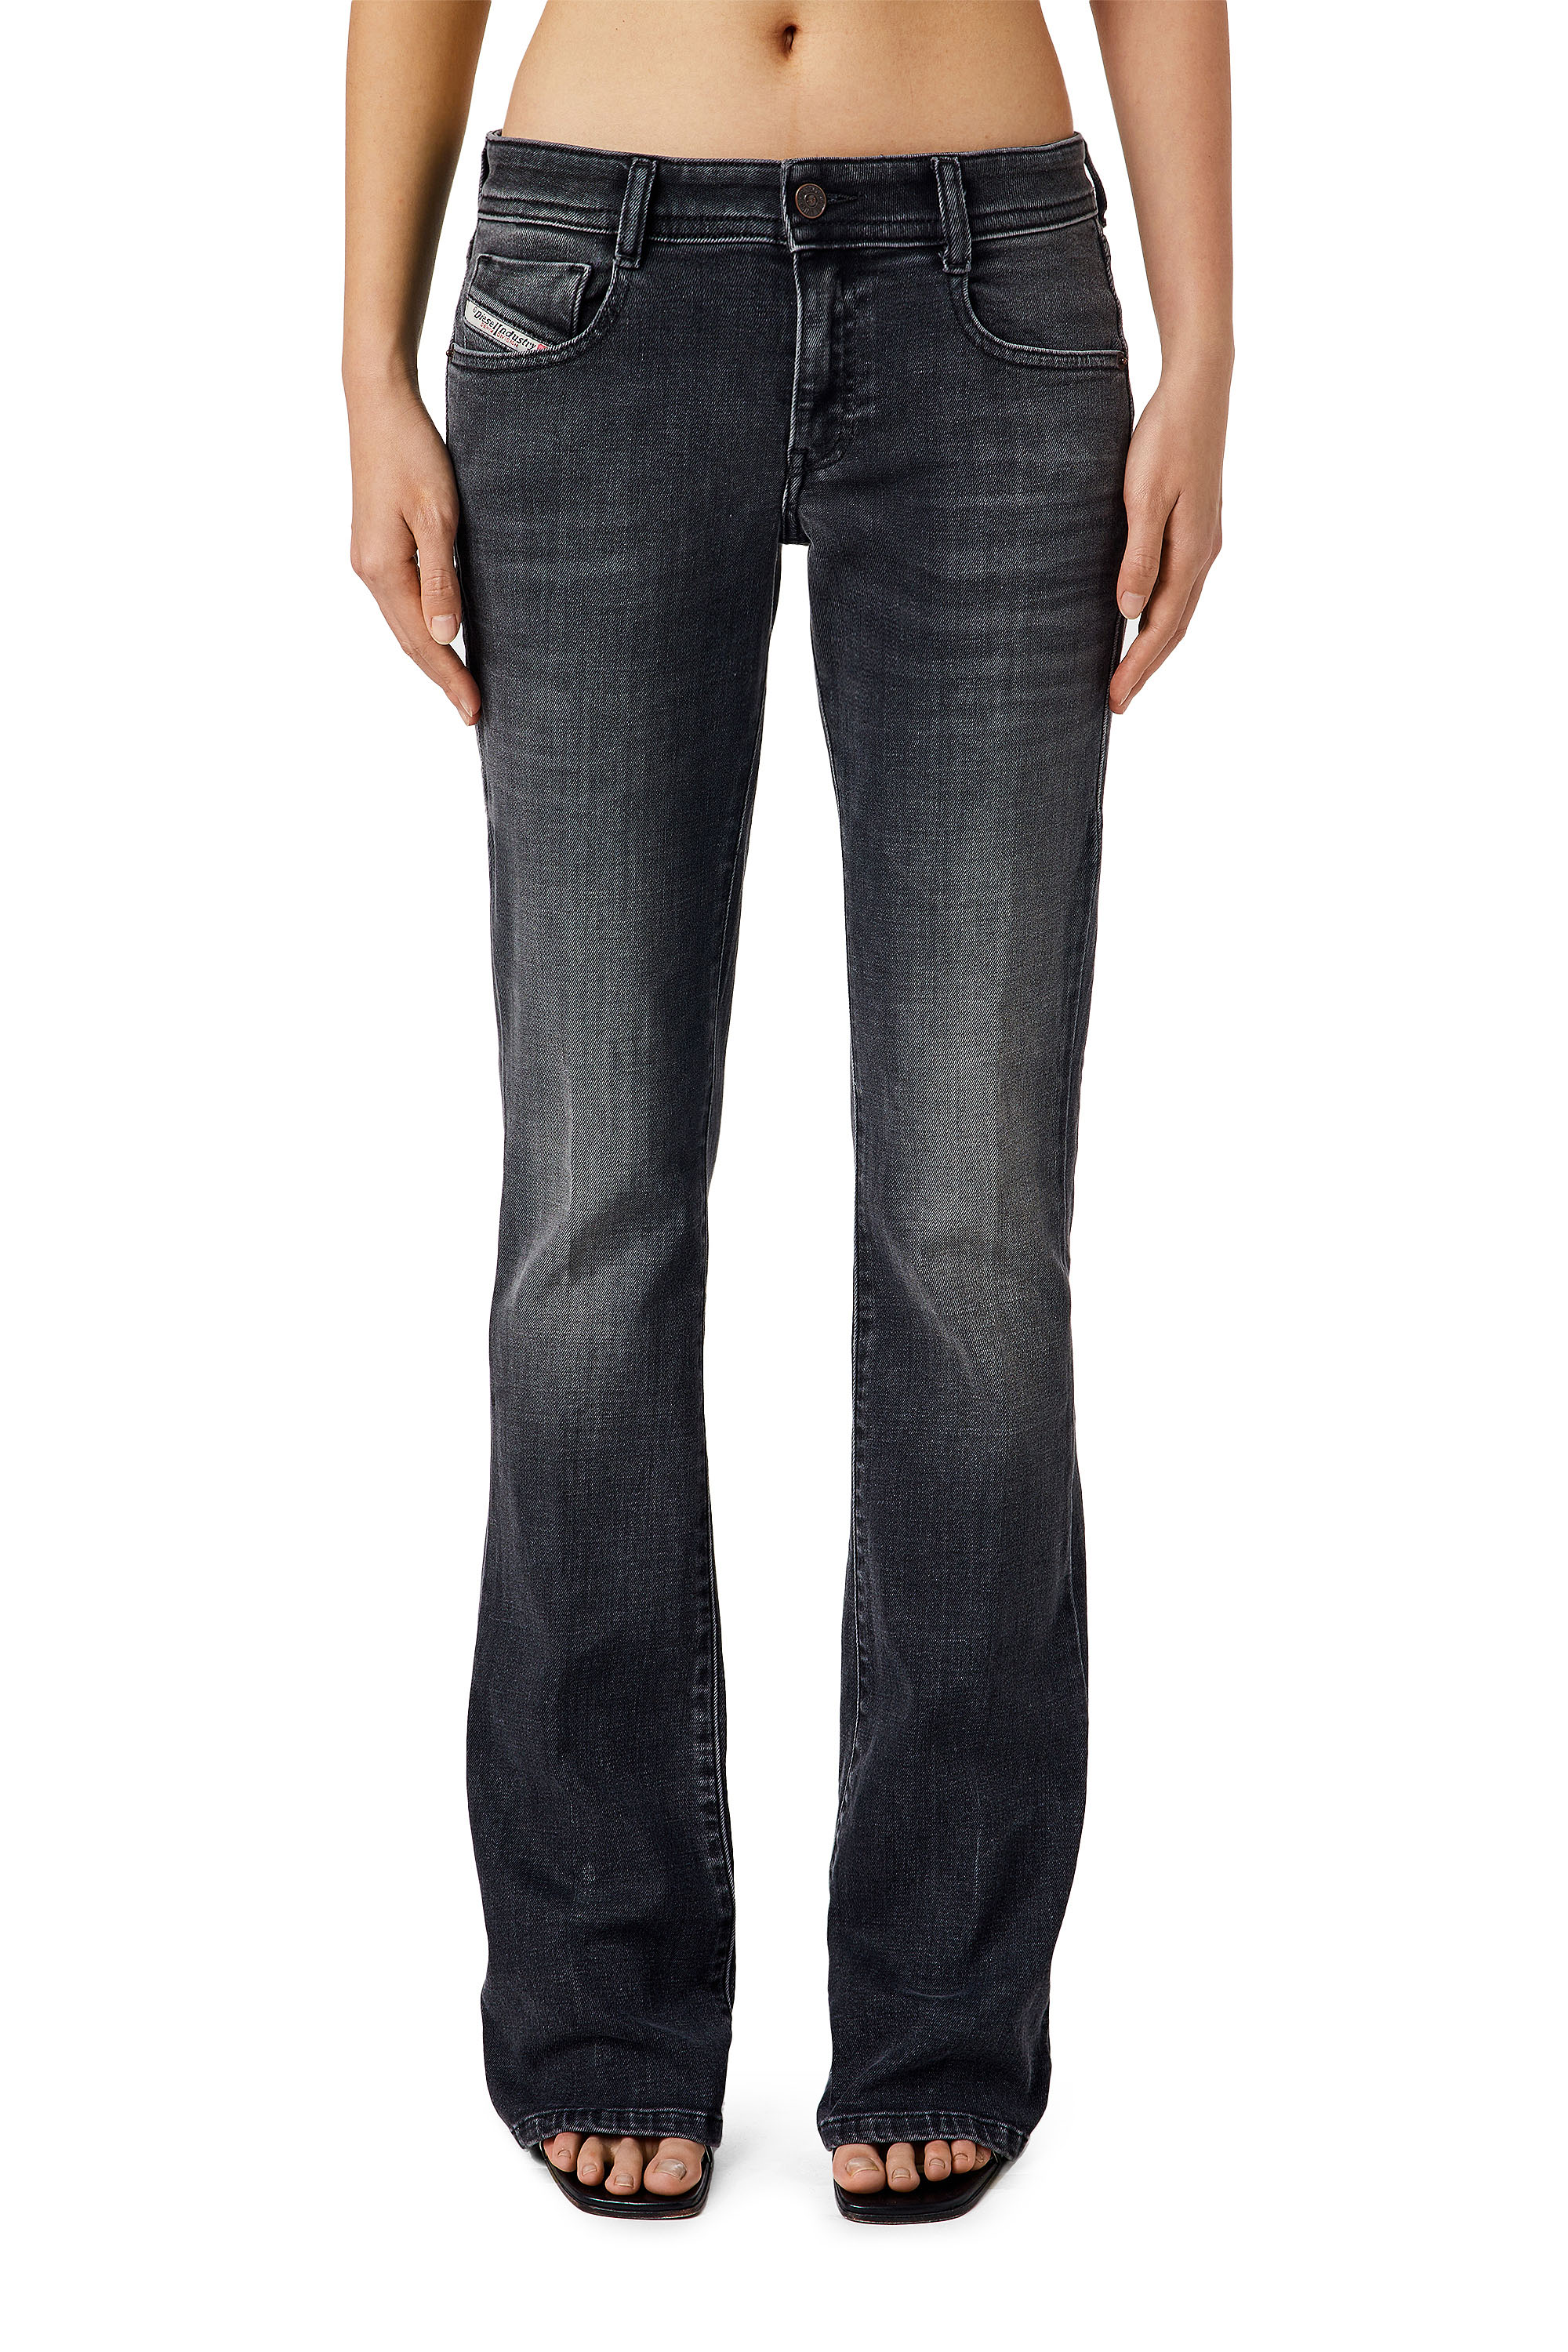 1969 D-EBBEY 0EIAG Bootcut and Flare Jeans, Black/Dark grey - Jeans